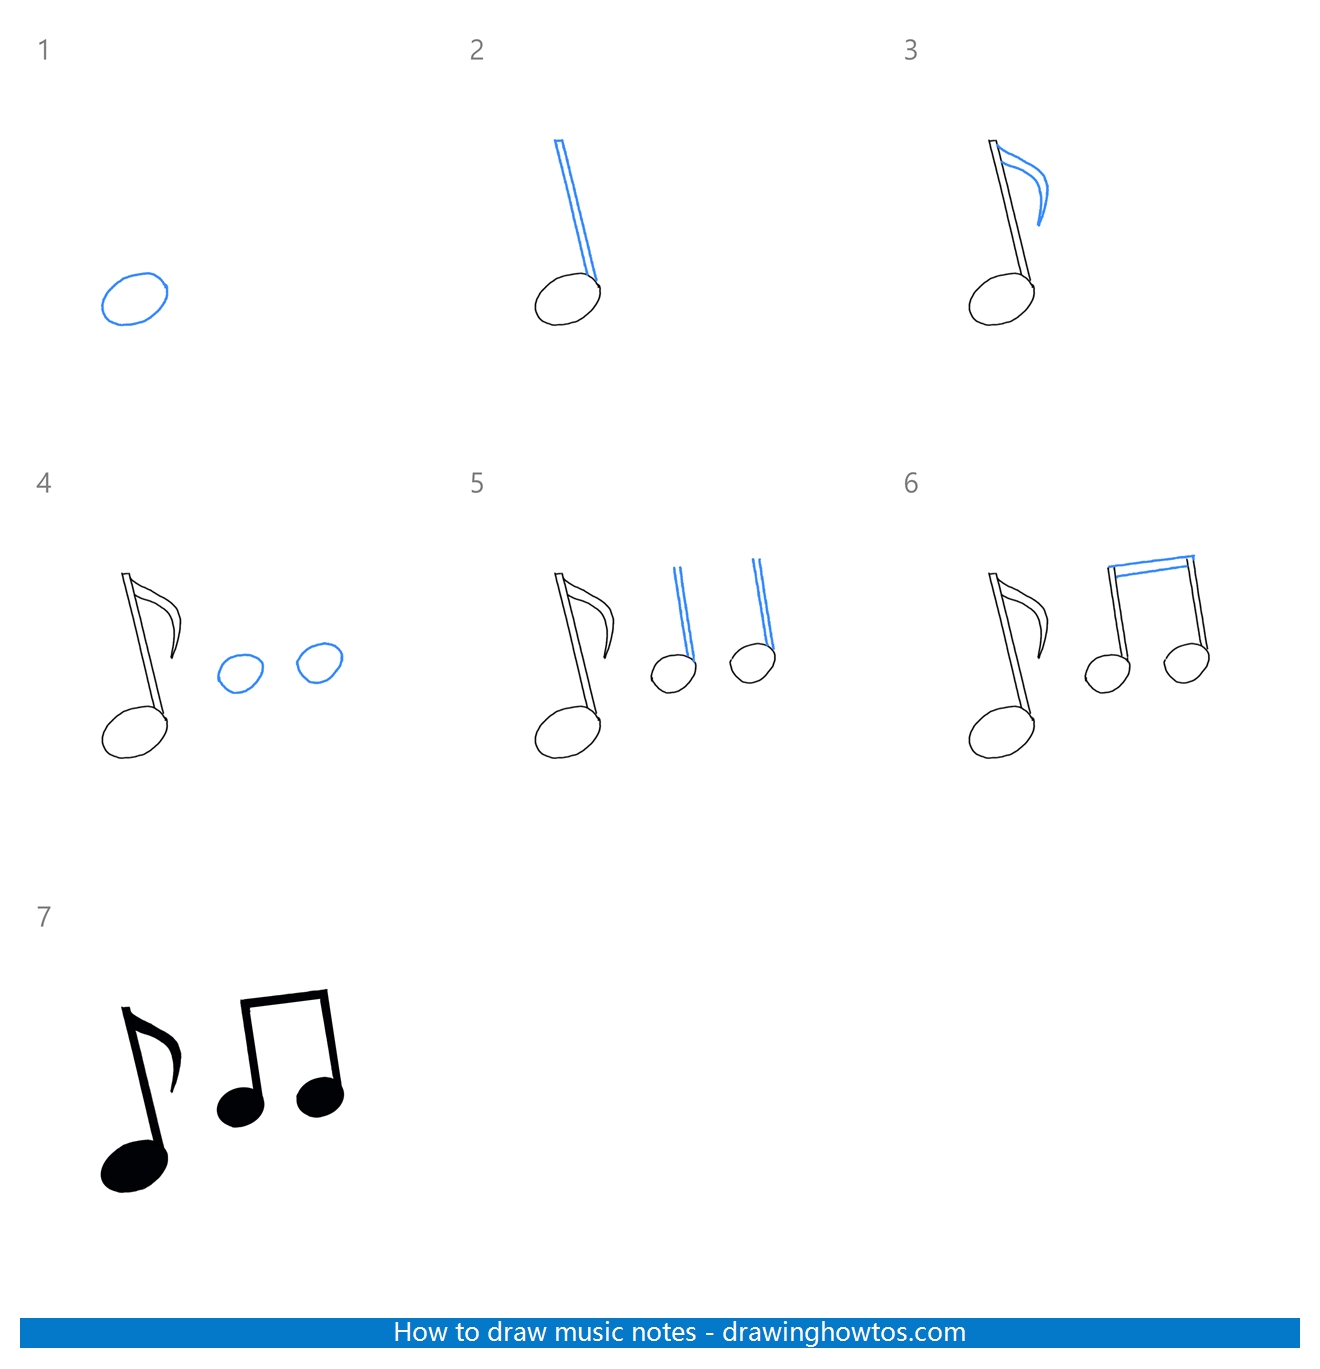 How to Draw Music Notes Step by Step